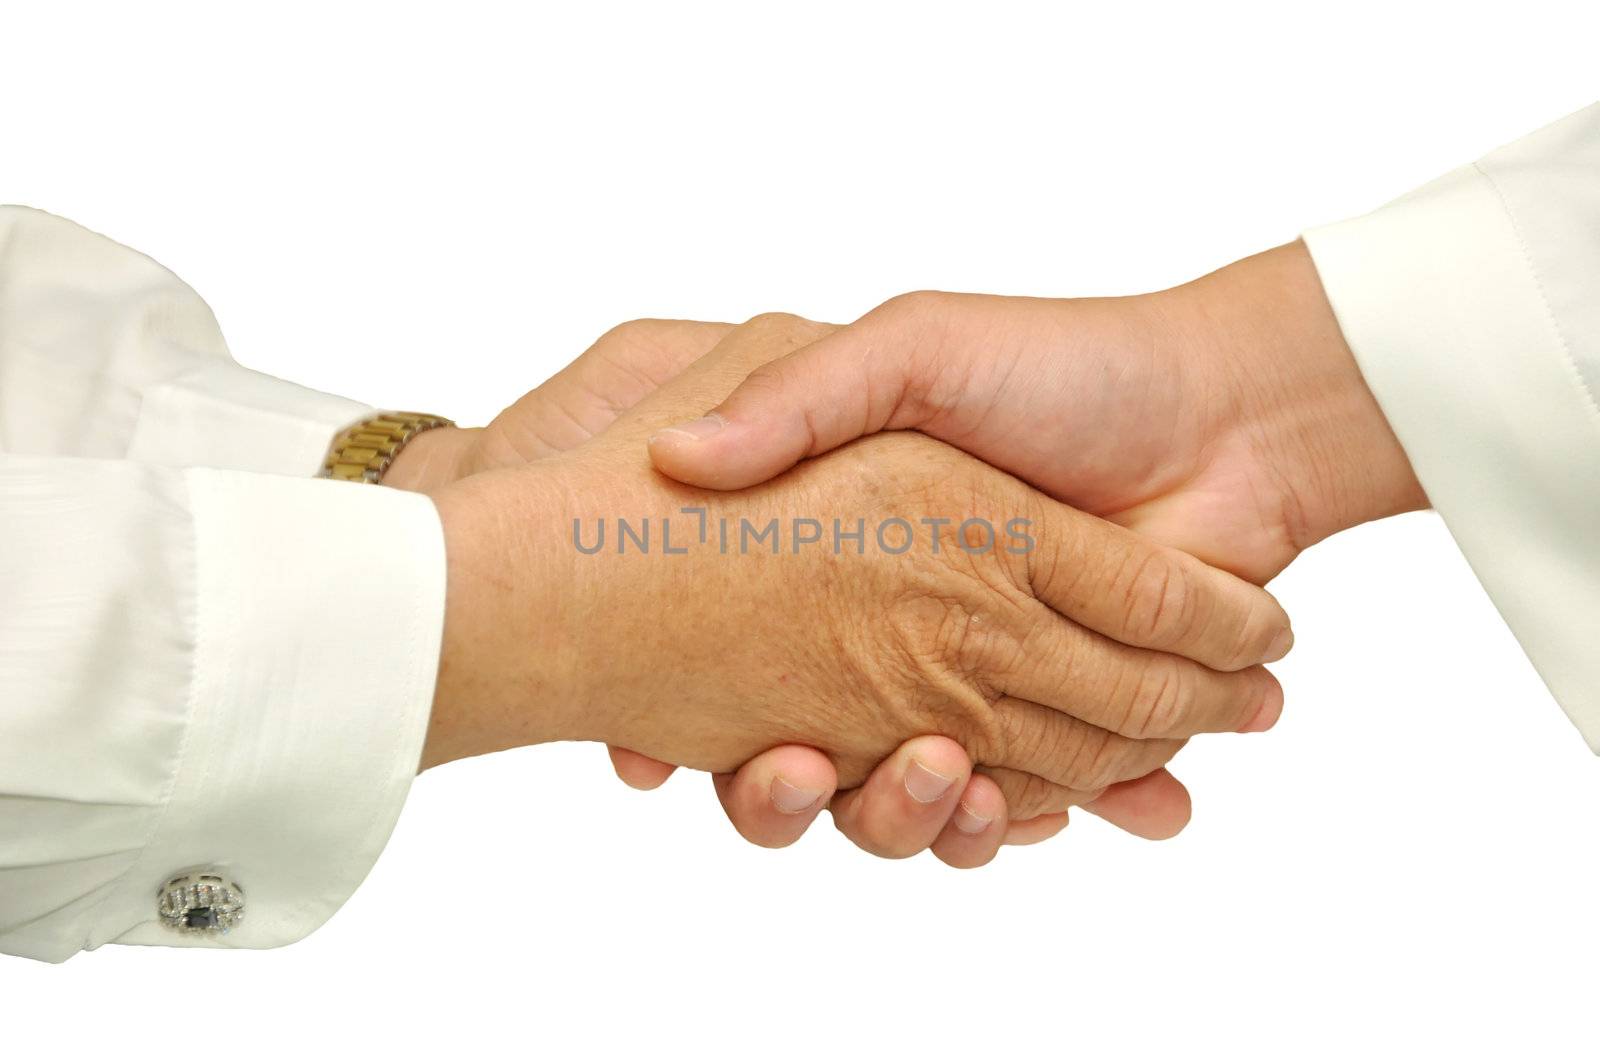 Hand shake - hand shake in front of a white background